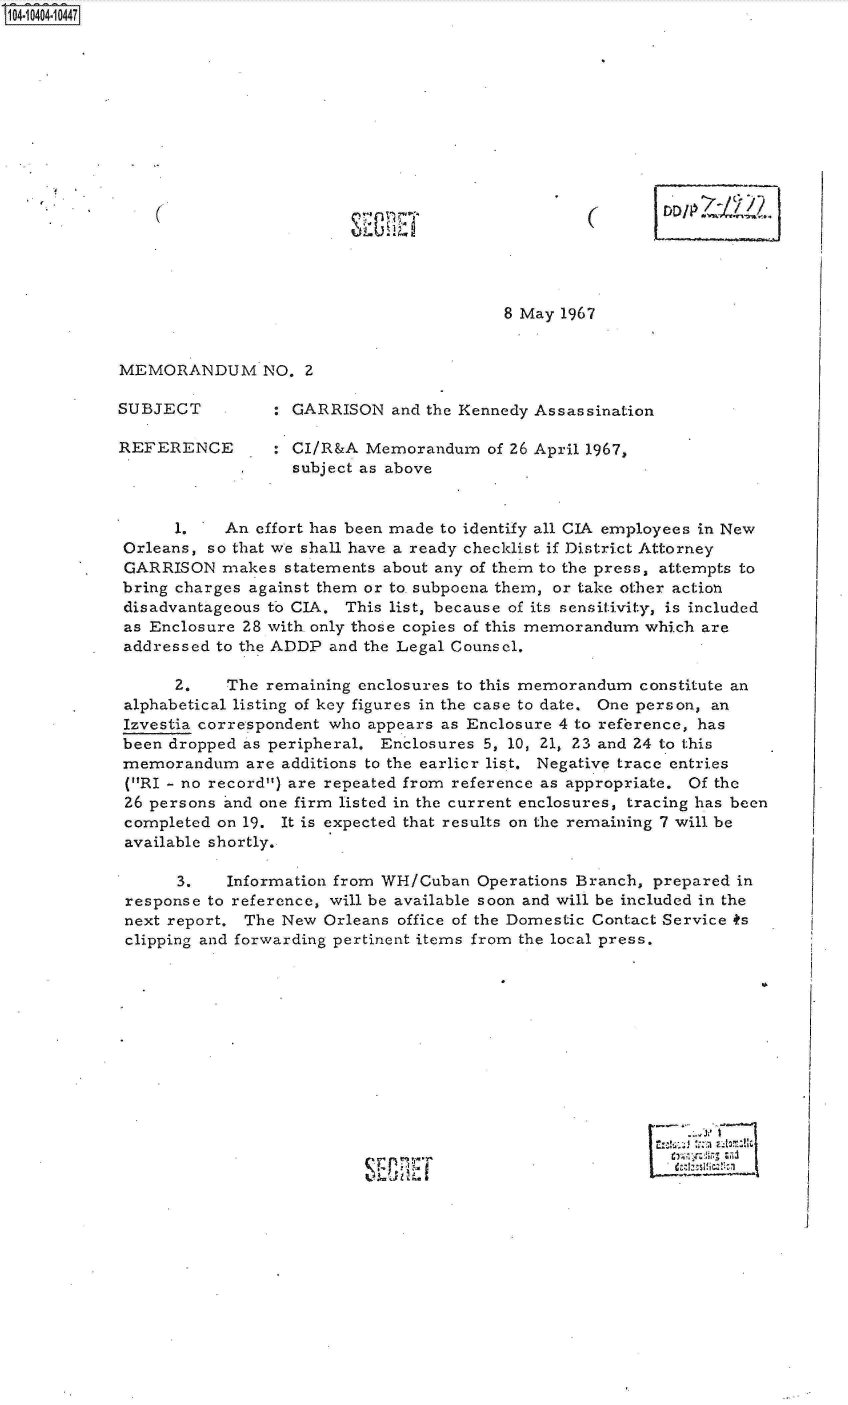 handle is hein.jfk/jfkarch19392 and id is 1 raw text is: S1O4~iO4O4~1O447


8 May 1967


MEMORANDUM NO. 2


SUBJECT

REFERENCE


: GARRISON   and the Kennedy Assassination

: CI/R&A  Memorandum   of 26 April 1967,
  subject as above


      1.   An effort has been made to identify all CIA employees in New
Orleans, so that we shall have a ready checklist if District Attorney
GARRISON   makes  statements about any of them to the press, attempts to
bring charges against them or to subpoena them, or take other action
disadvantageous to CIA. This list, because of its sensitivity, is included
as Enclosure 28 with. only those copies of this memorandum which are
addressed to the ADDP and the Legal Counsel.

      2.   The  remaining enclosures to this memorandum constitute an
alphabetical listing of key figures in the case to date. One person, an
Izvestia correspondent who appears as Enclosure 4 to reference, has
been dropped as peripheral. Enclosures 5, 10, 21, 23 and 24 to this
memorandum   are additions to the earlier list. Negative trace entries
(RI - no record) are repeated from reference as appropriate. Of the
26 persons and one firm listed in the current enclosures, tracing has been
completed on 19. It is expected that results on the remaining 7 will be
available shortly.

      3.   Information from WH/Cuban  Operations Branch, prepared in
response to reference, will be available soon and will be included in the
next report. The New  Orleans office of the Domestic Contact Service ts
clipping and forwarding pertinent items from the local press.


.1


(


(


J U


